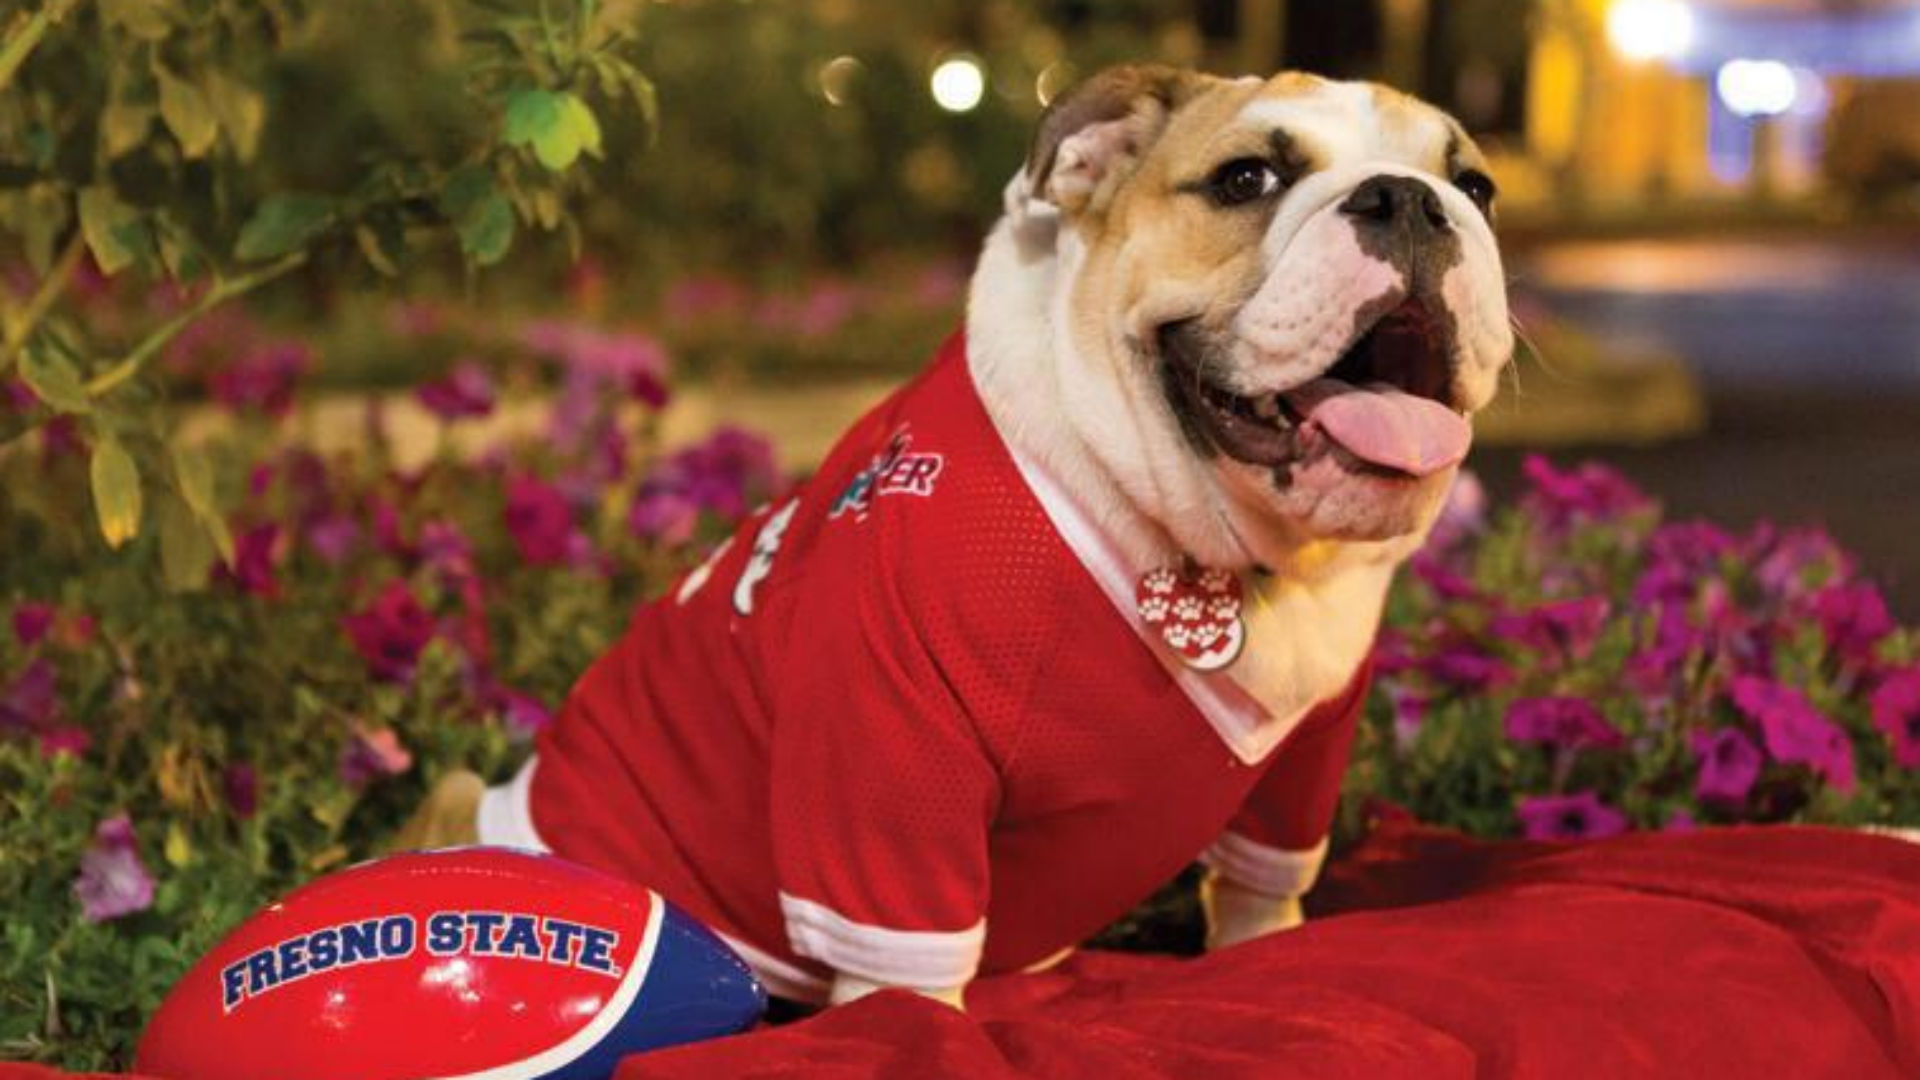 Fresno State's bulldog mascot passes away after bee sting